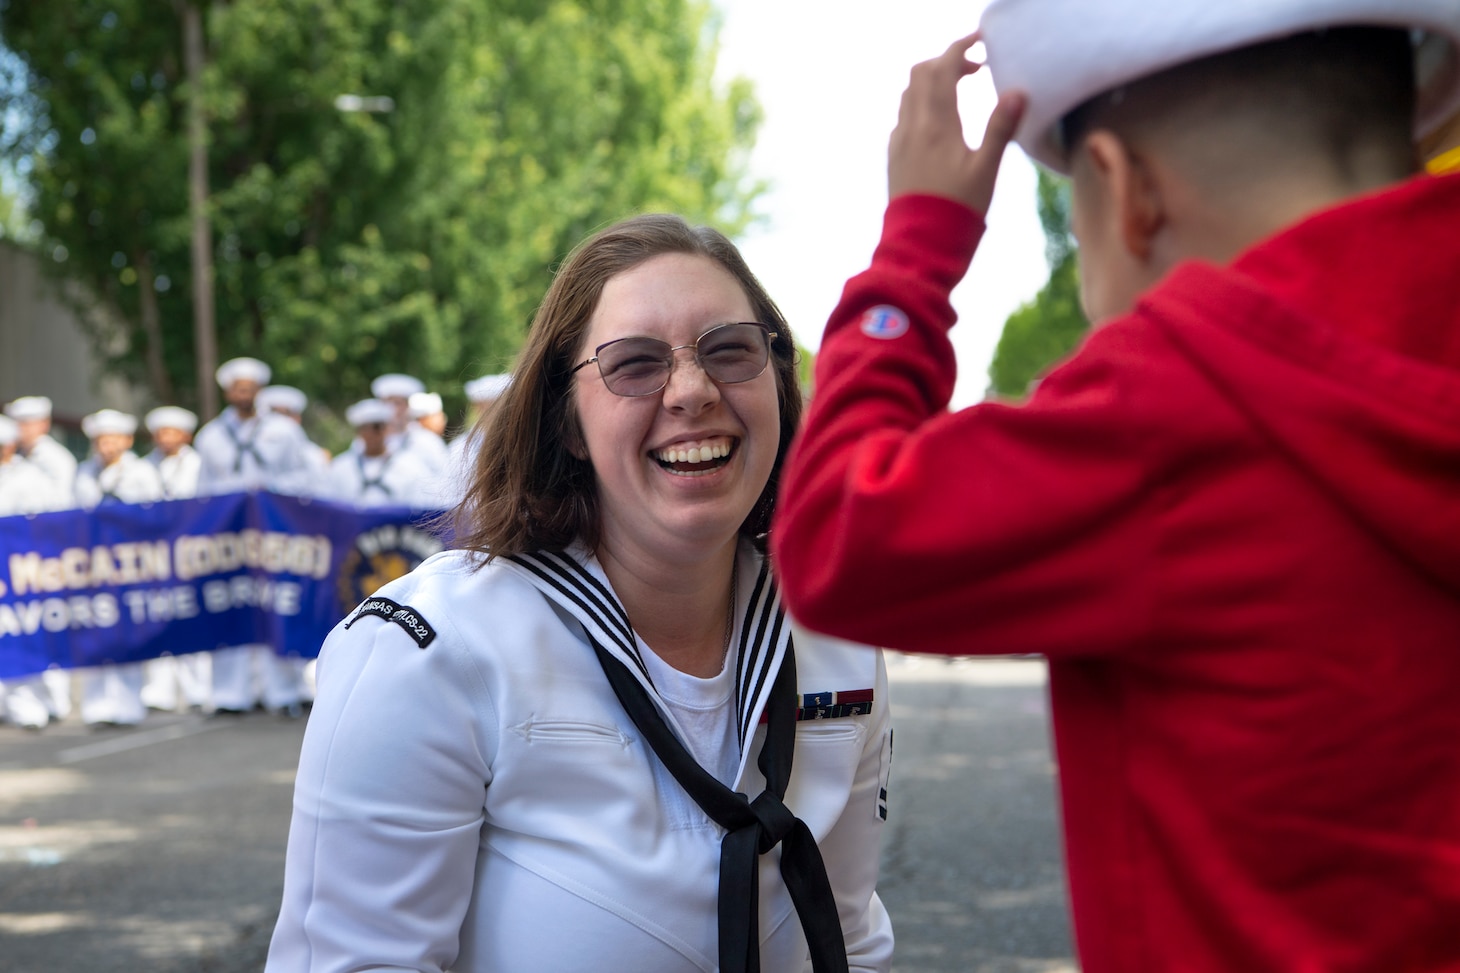 Logistics Specialist 2nd Class Autumn Hoadley, assigned to USS Kansas City (LCS 22), shares her cover with a child at the annual Rose Festival Parade during Portland Fleet Week in Portland, Oregon, June 10, 2023. Portland Fleet Week is a time-honored celebration of the sea services and provides an opportunity for the citizens of Oregon to meet Sailors, Marines and Coast Guardsmen, as well as witness firsthand the latest capabilities of today's maritime services. (U.S. Navy photo by Mass Communication Specialist Seaman Sophia H. Bumps)